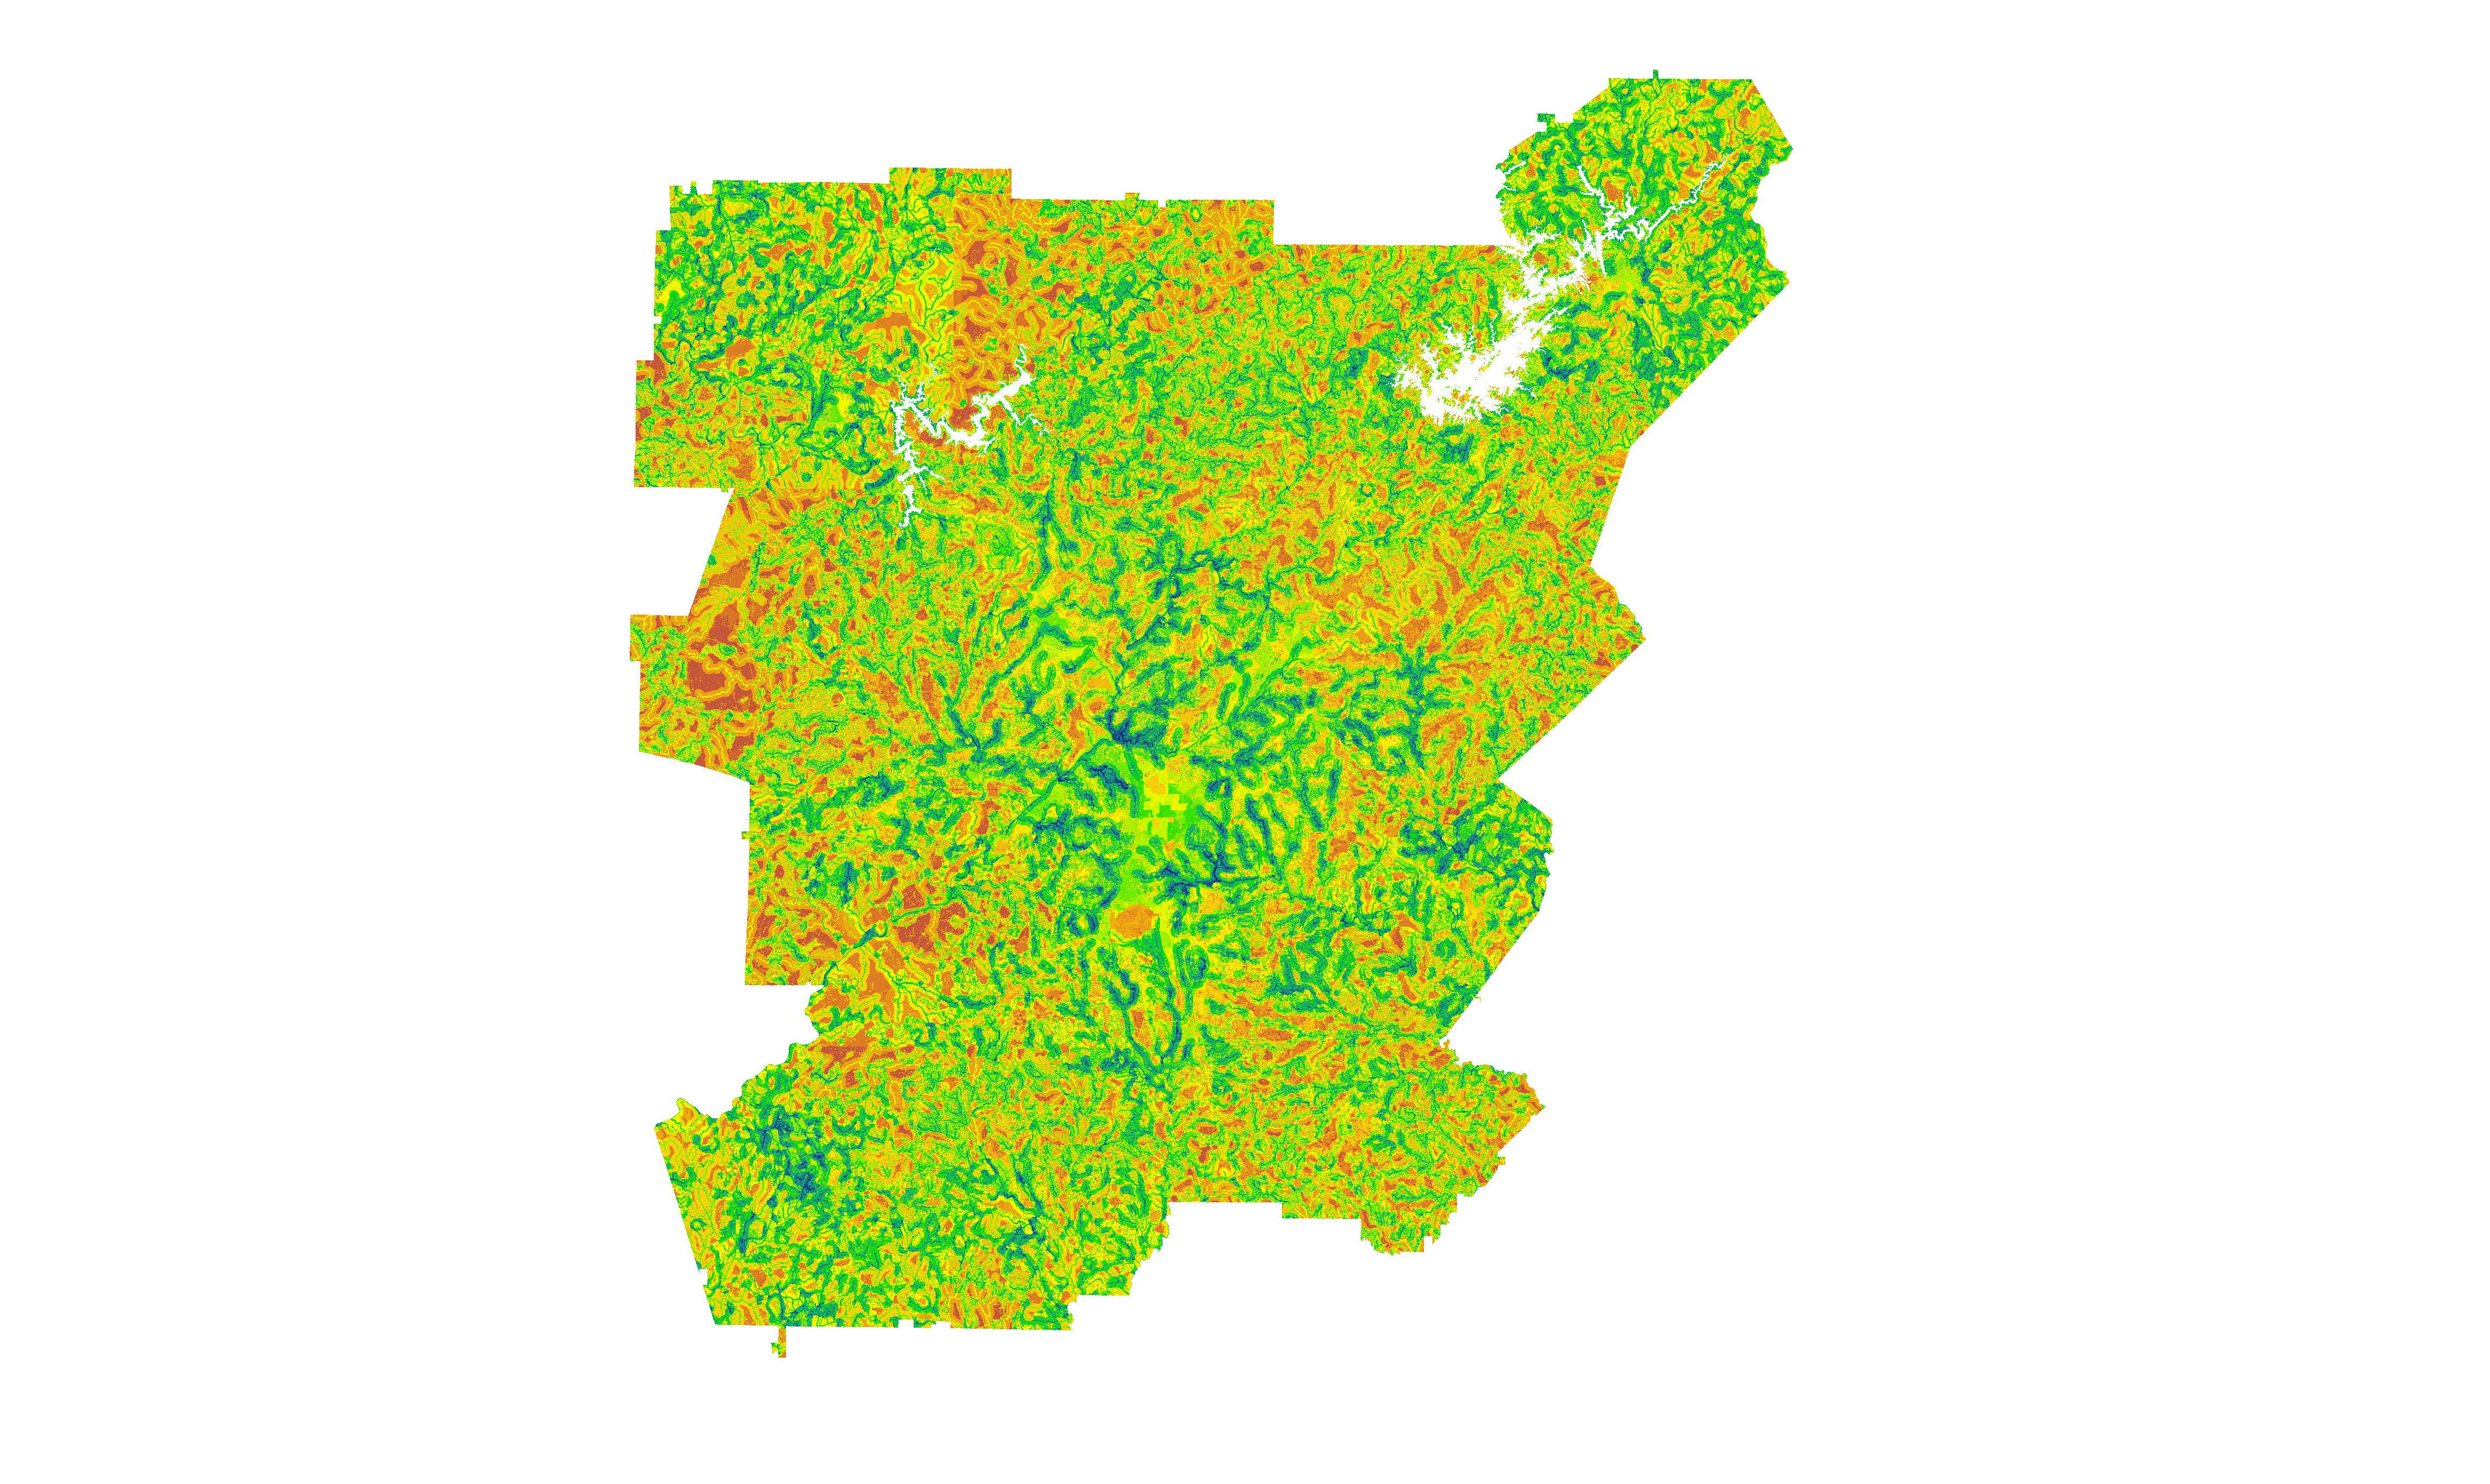 The kaleidoscope of colors in the GIS decision map created by NASA DEVELOP’s University of Georgia team will help The Nature Conservancy chart a future for urban forestry and water quality management in greater Atlanta. (Image courtesy of NASA DEVELOP)